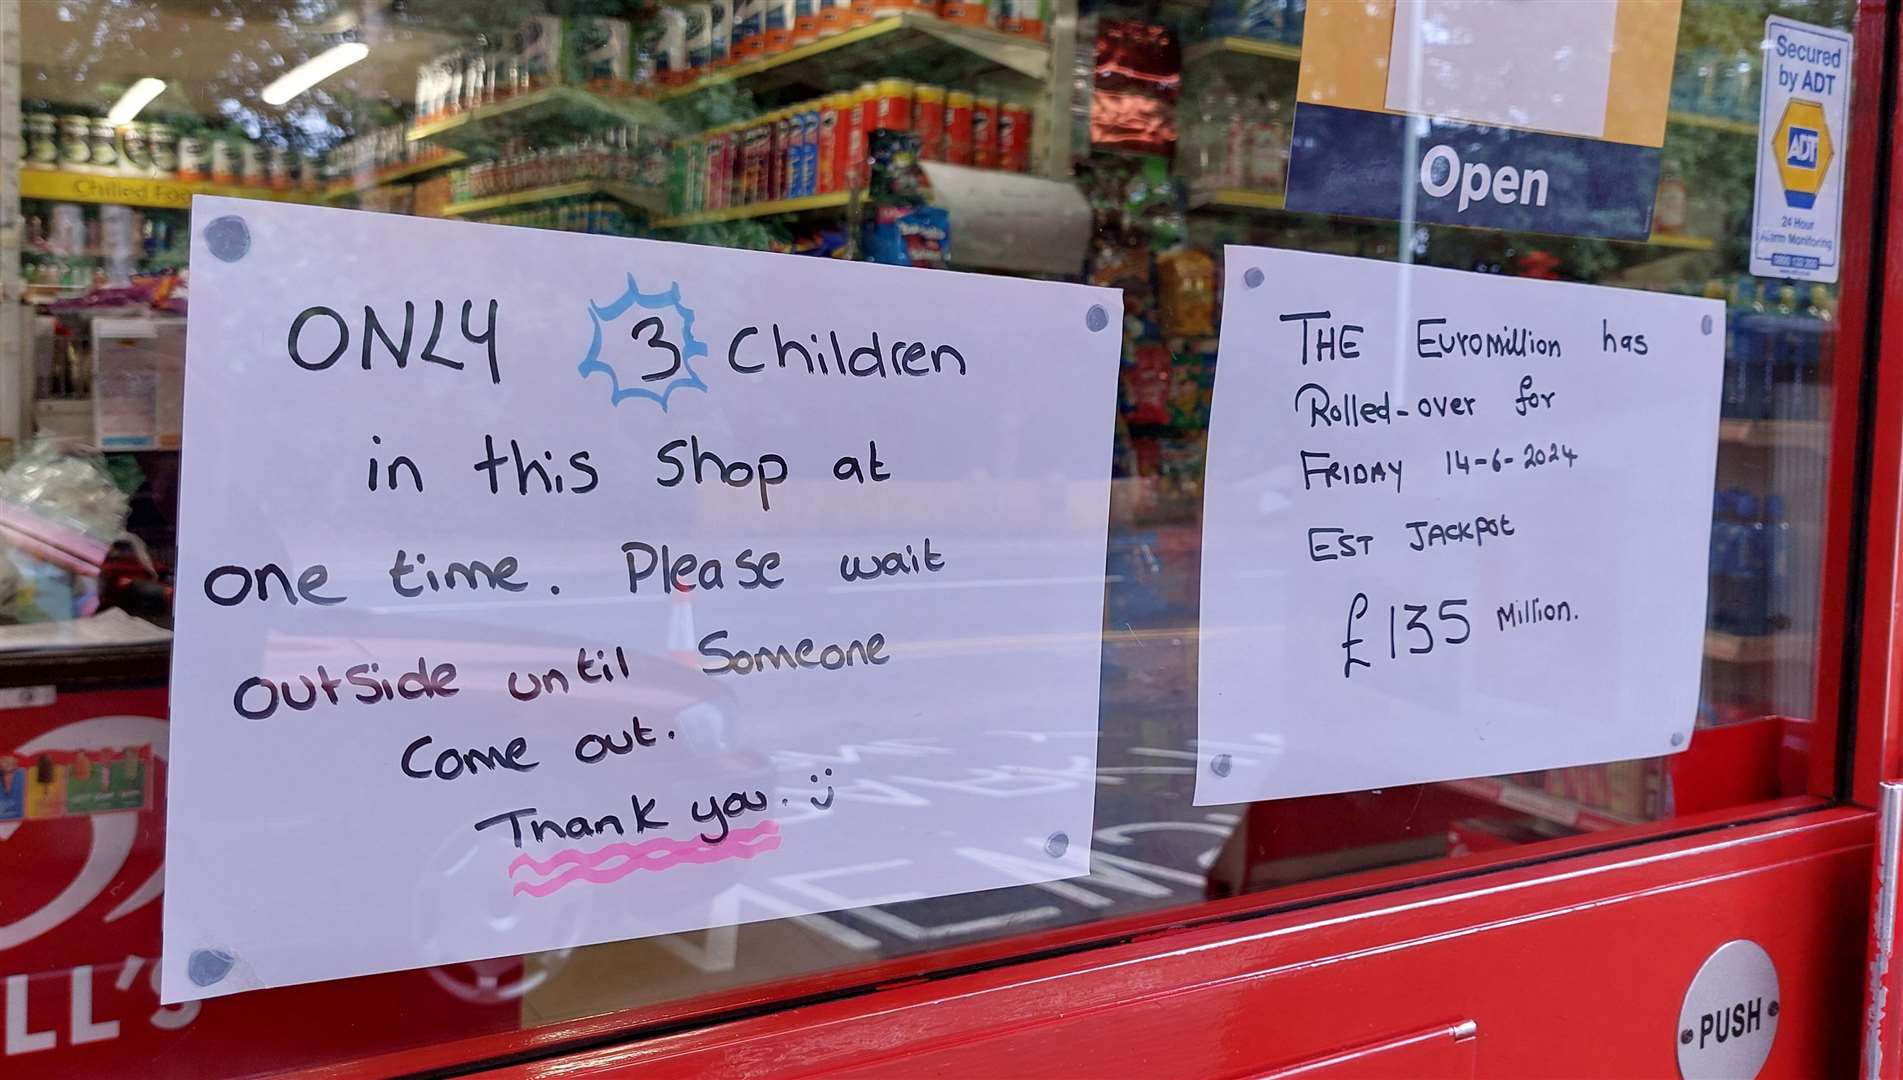 Rules limiting the number of children in the shop at once have recently been introduced